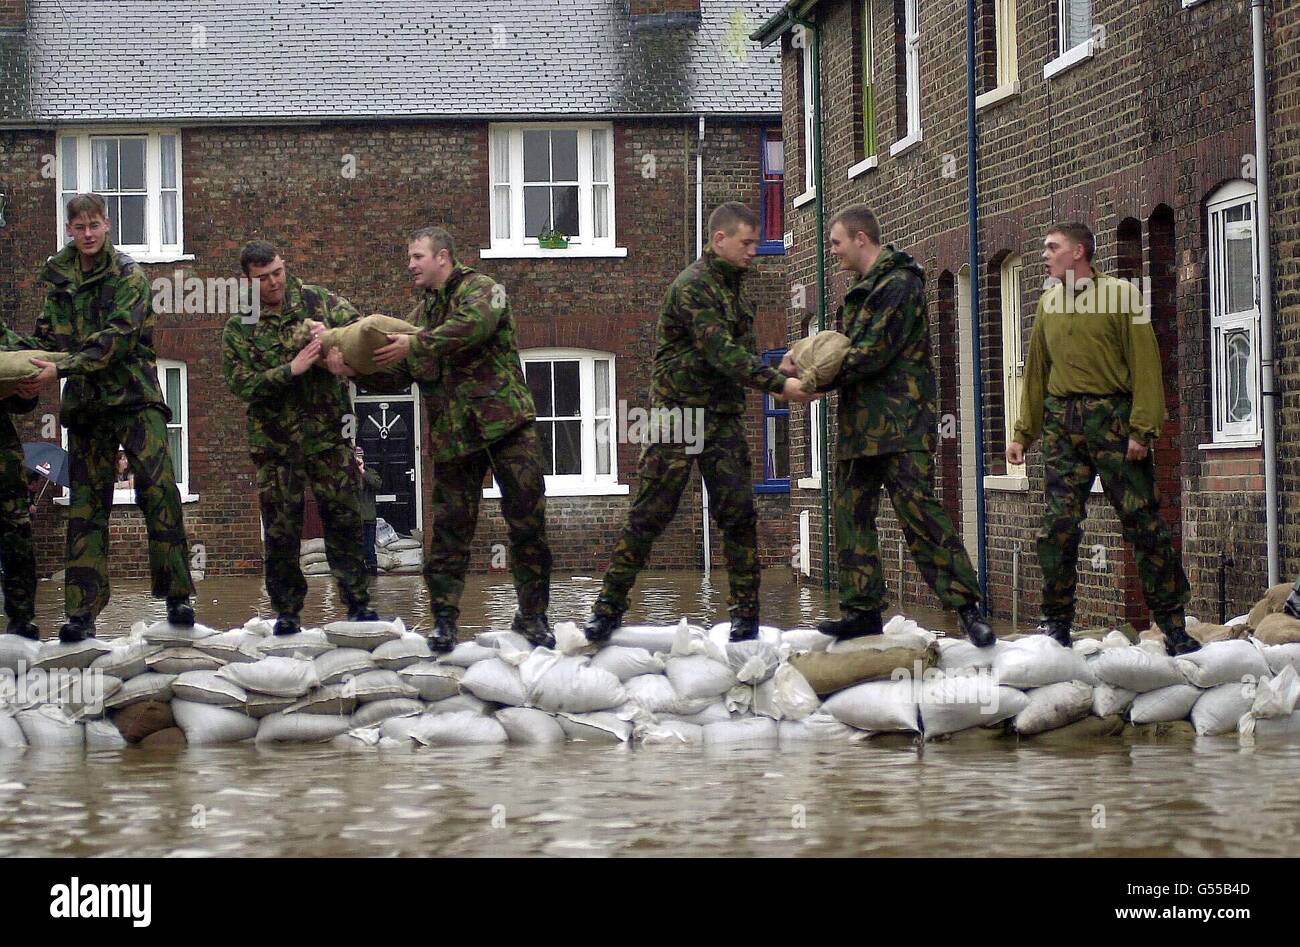 The army bolster defences in River Street, in the Clementhorpe area of York, North Yorkshire. Communities in Yorkshire are on a knife edge as they await new flood peaks which could bring further havoc to their homes. * Emergency services have pinpointed the towns of Barlby and Selby as the main trouble spots. 13/12/2000 The Government is being urged to focus its disaster policies and money on curbing the threat to Britain from natural catastrophes rather than on giving aid abroad. The call comes at a conference organised by the UK Natural Disaster Reduction Committee and the Hazards Forum. It Stock Photo